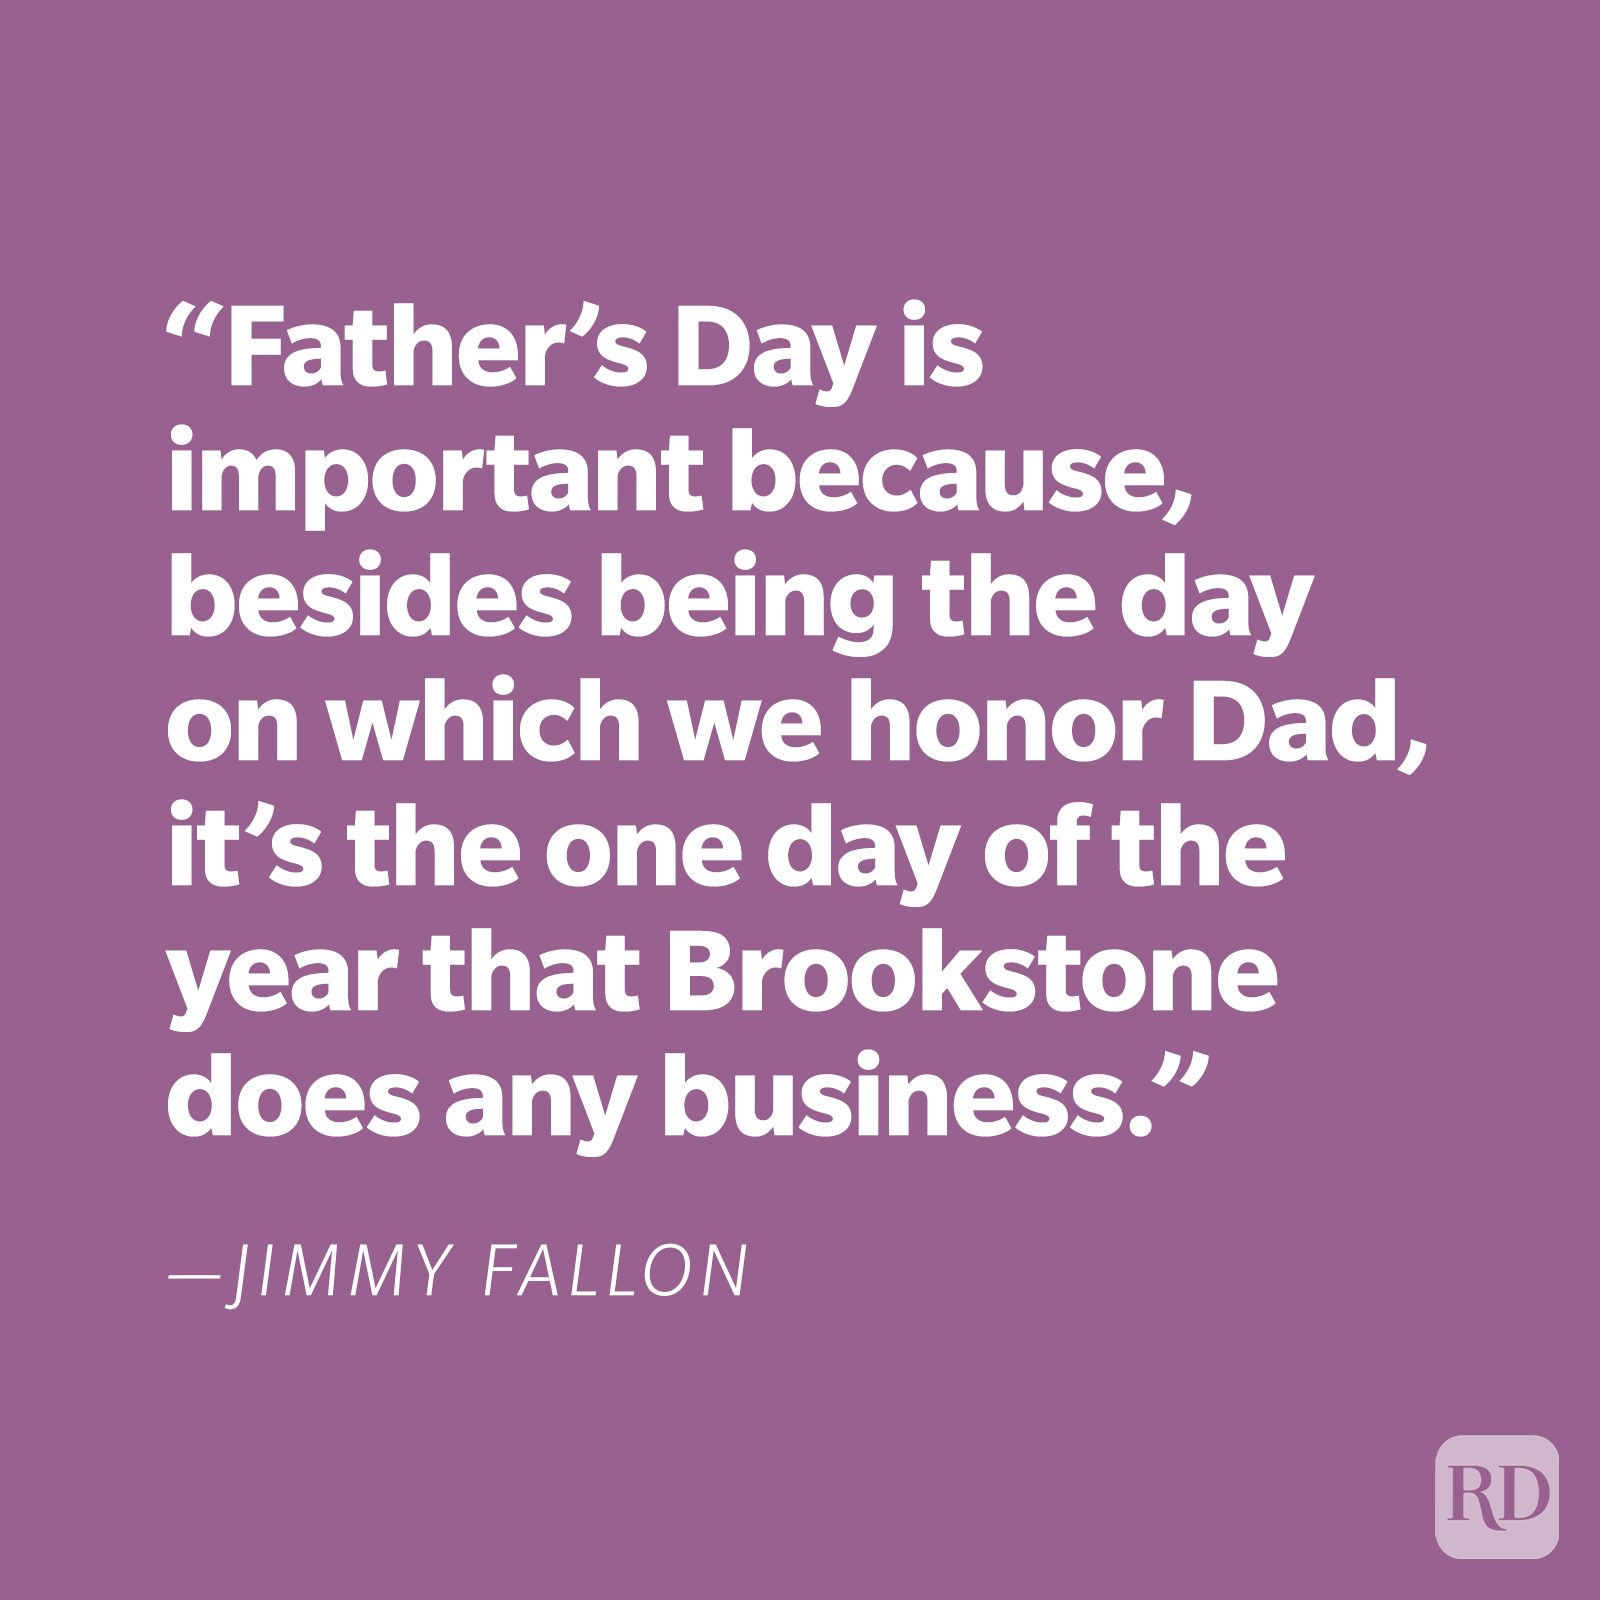 "Father's Day is important because, besides being the day on which we honor Dad, it's the one day of the year that Brookstone does any business." —Jimmy Fallon